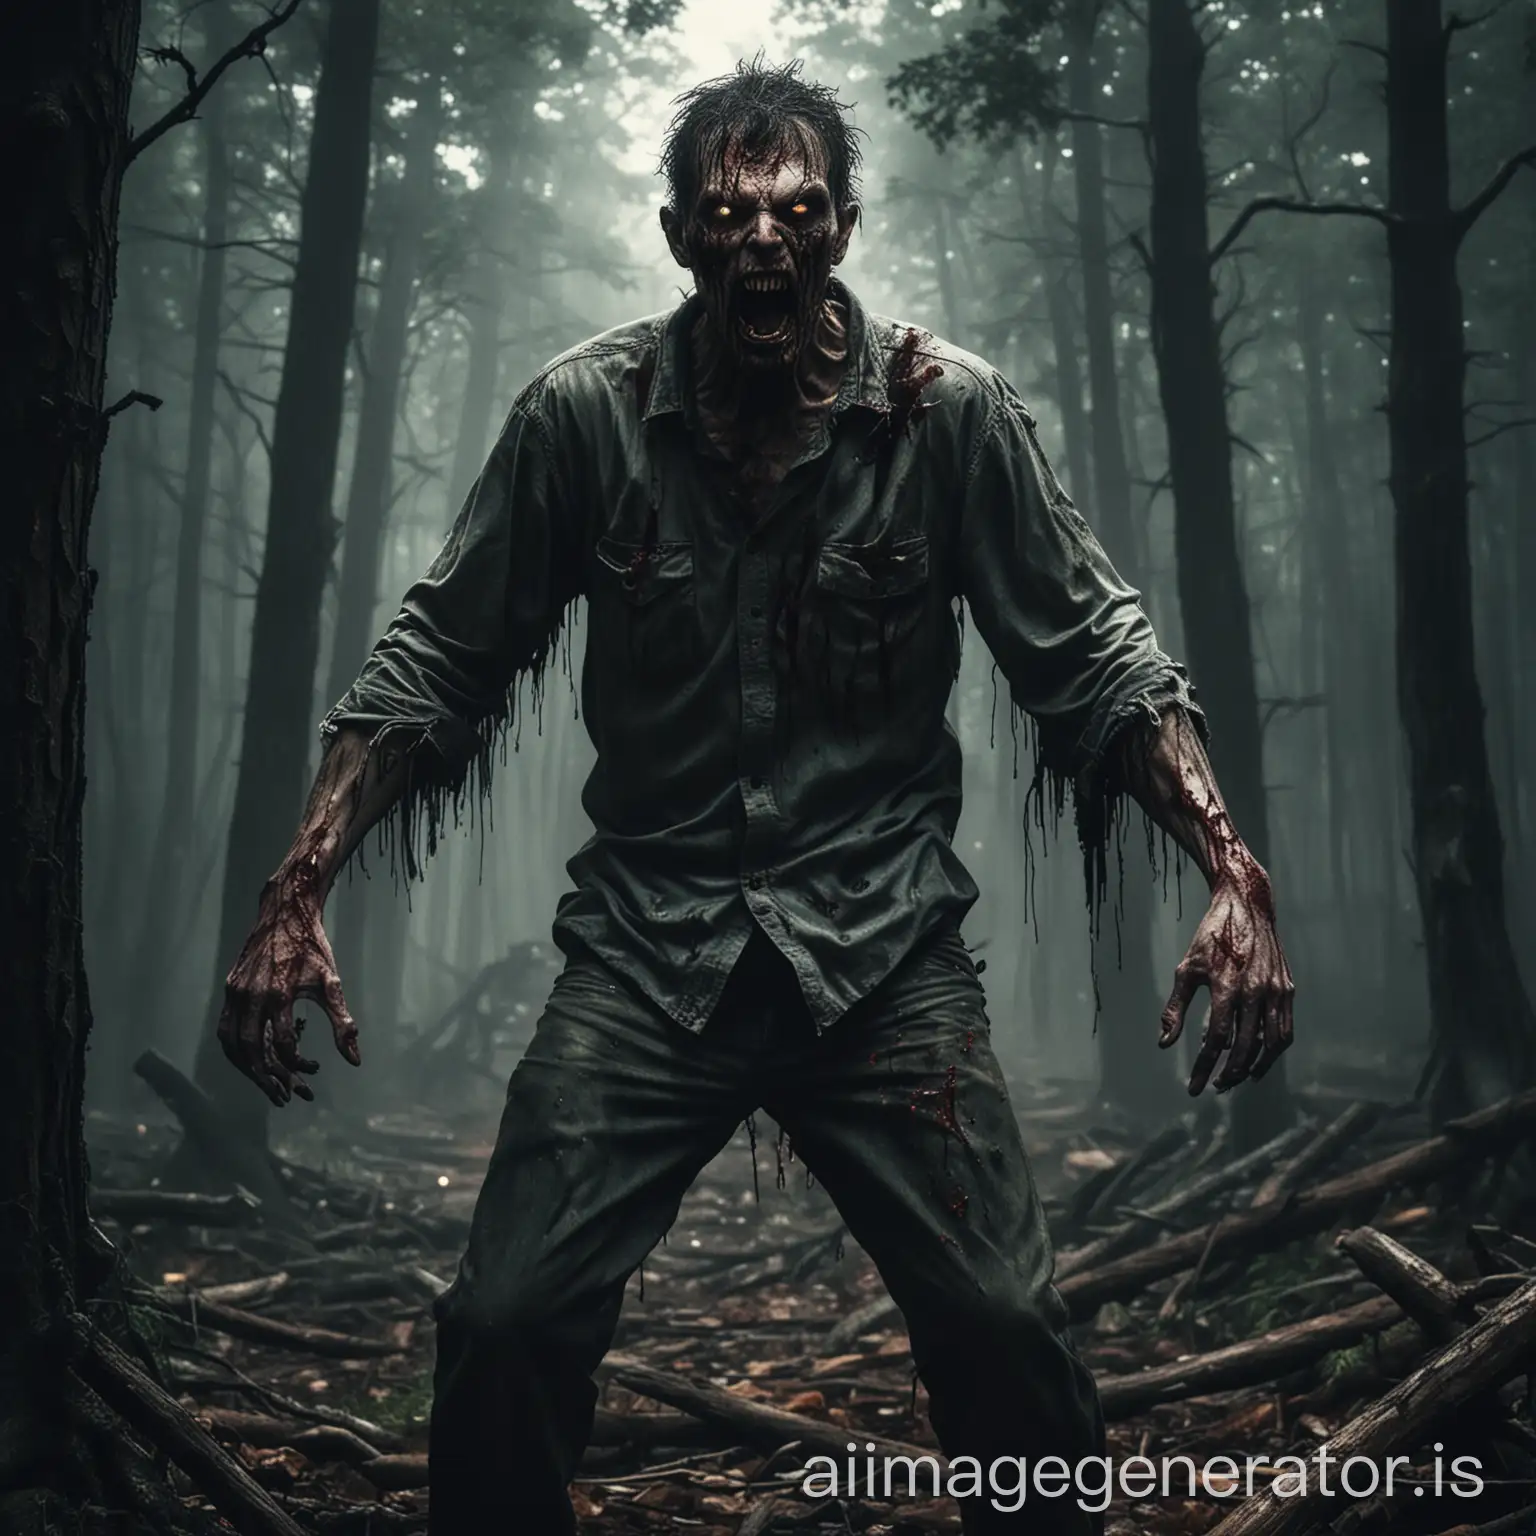 Furious-Zombie-Emerges-from-Dark-Forest-with-Bloodied-Hands